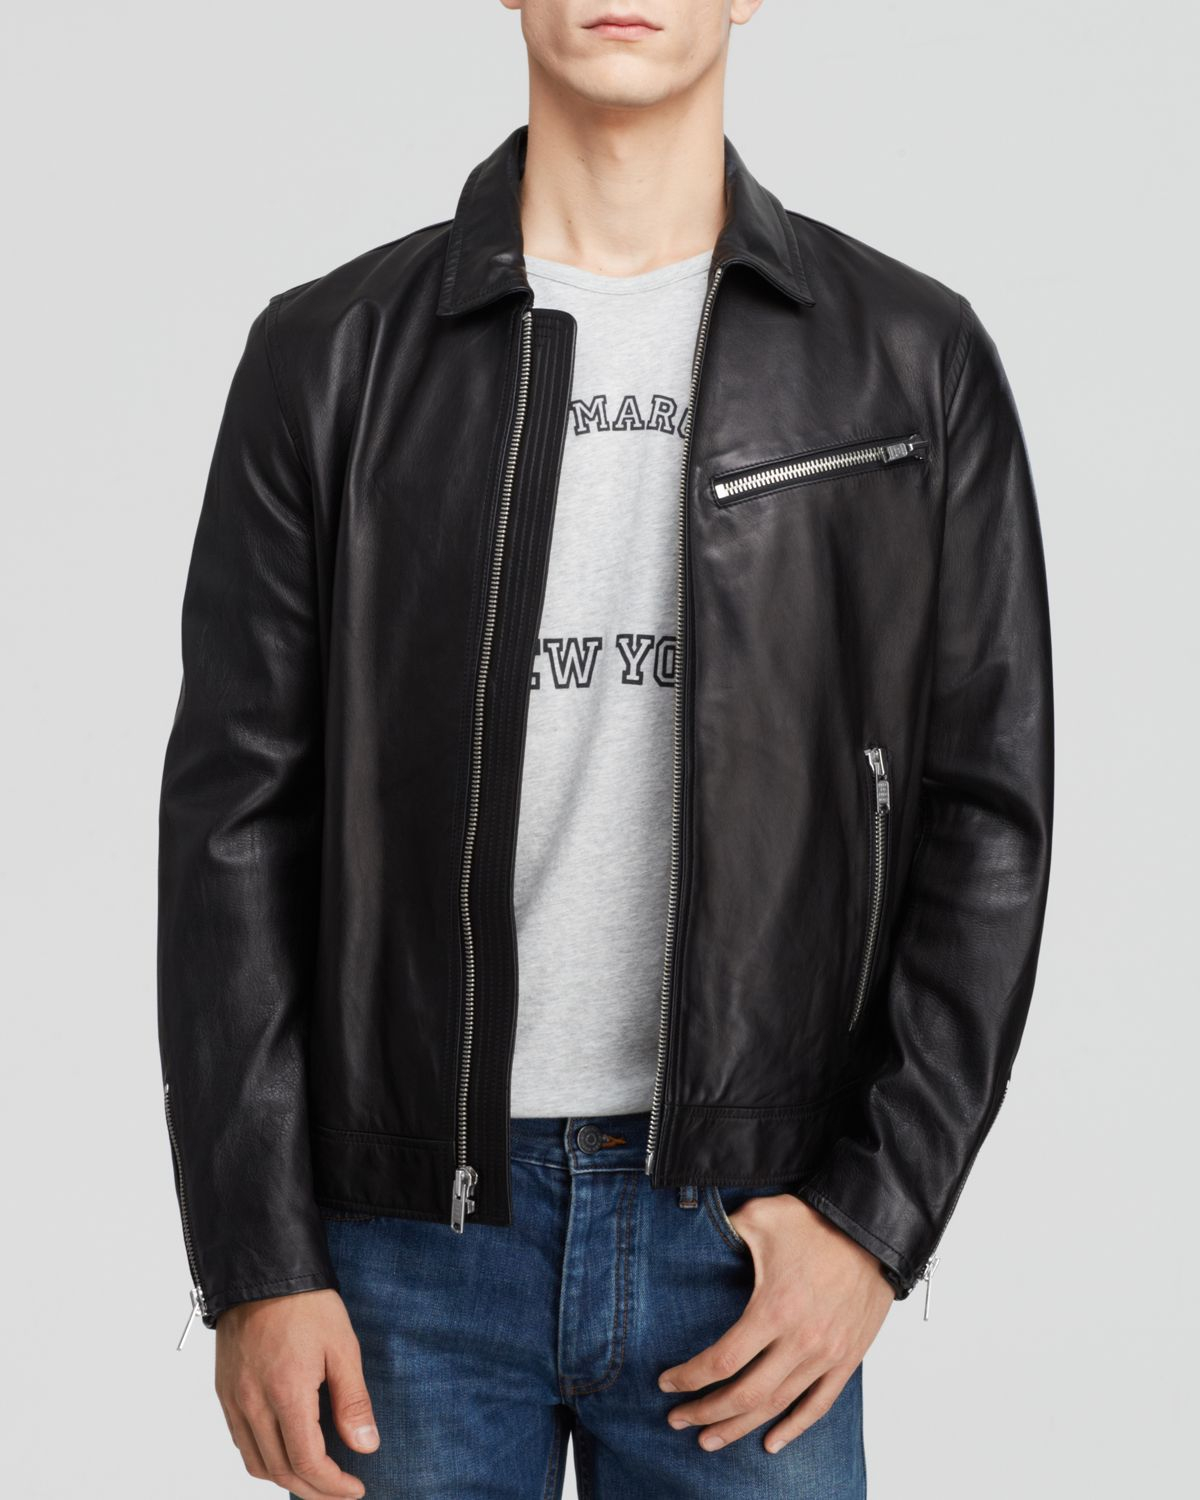 Lyst - Marc by marc jacobs Brennan Leather Jacket in Black for Men